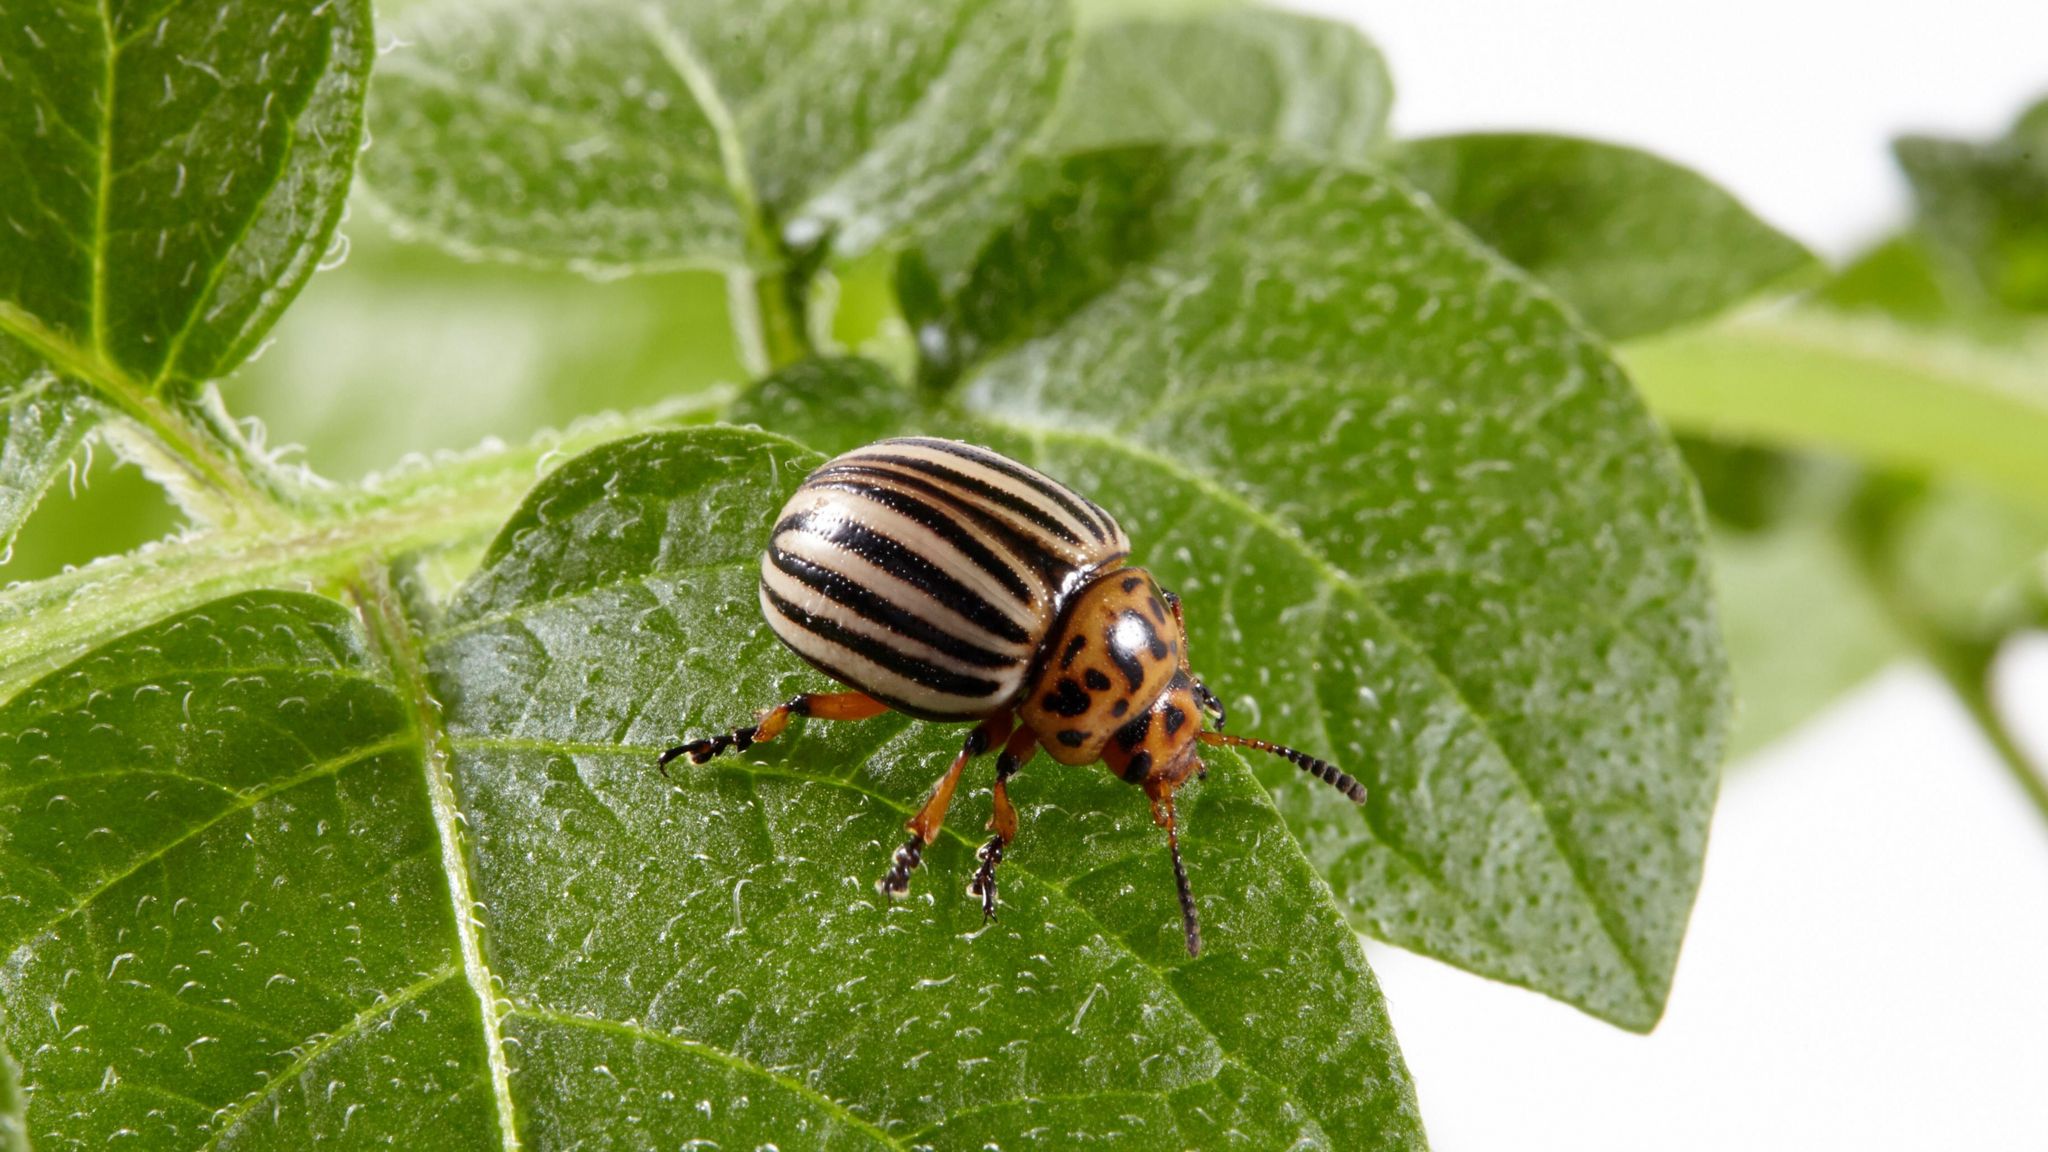 A fully grown Colorado beetle, with a spotted head and stripy body